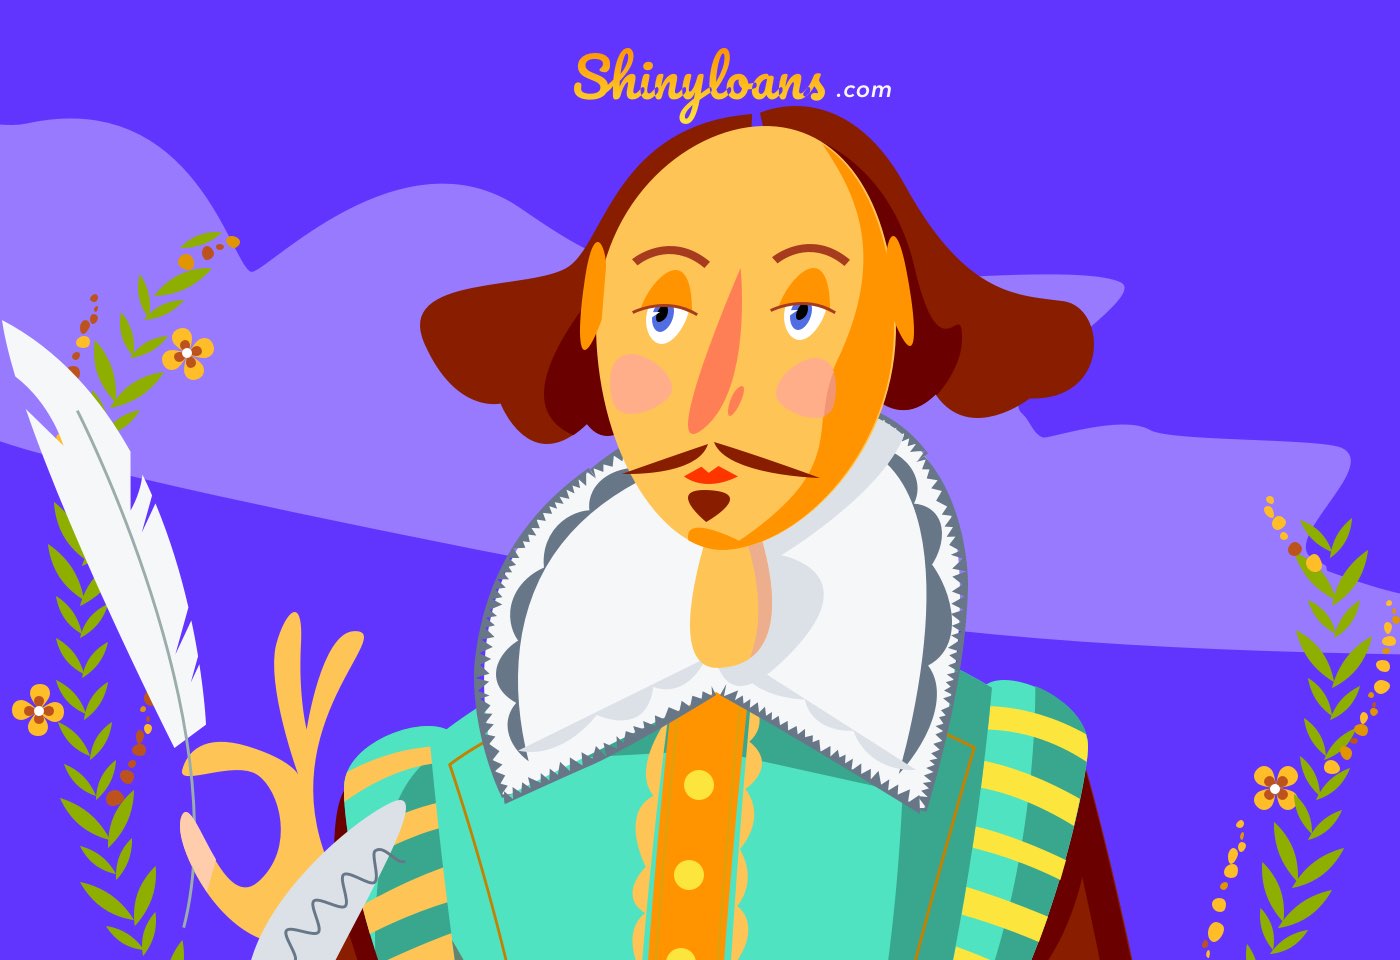 Shakespeare opinion  &  contemporary lending system